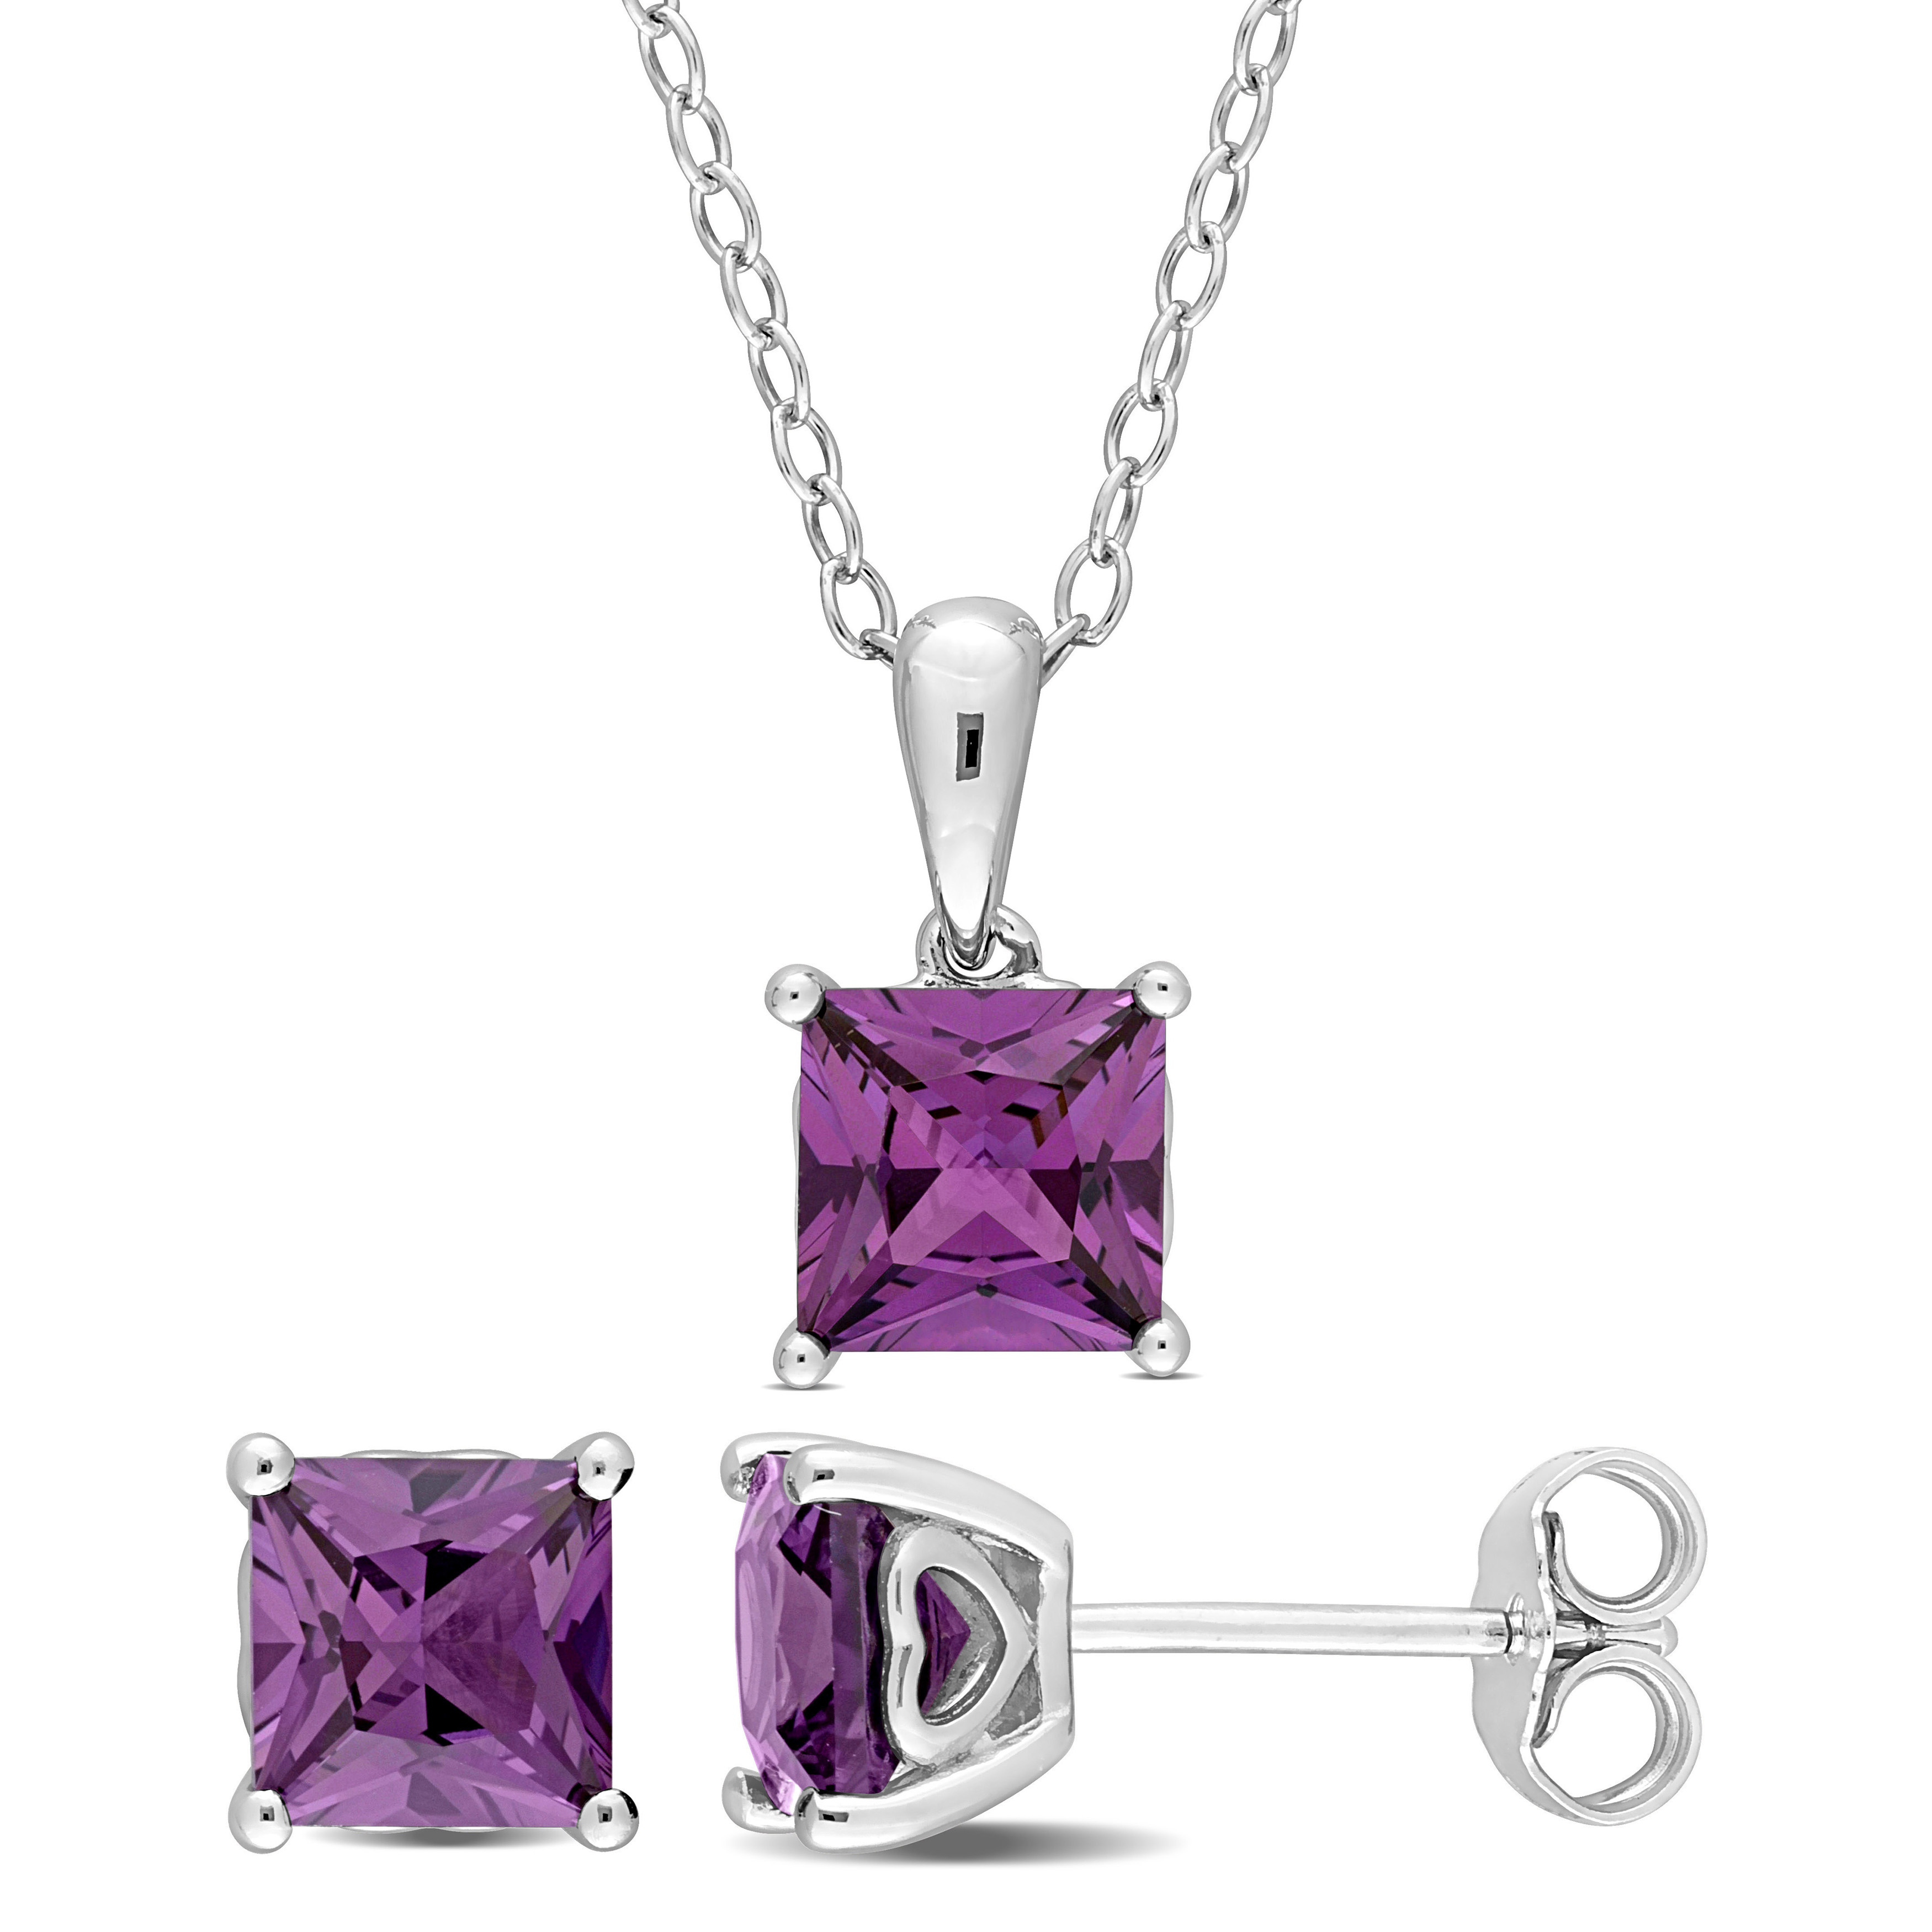 3 CT TGW Square Simulated Alexandrite Set With Chain in Sterling Silver